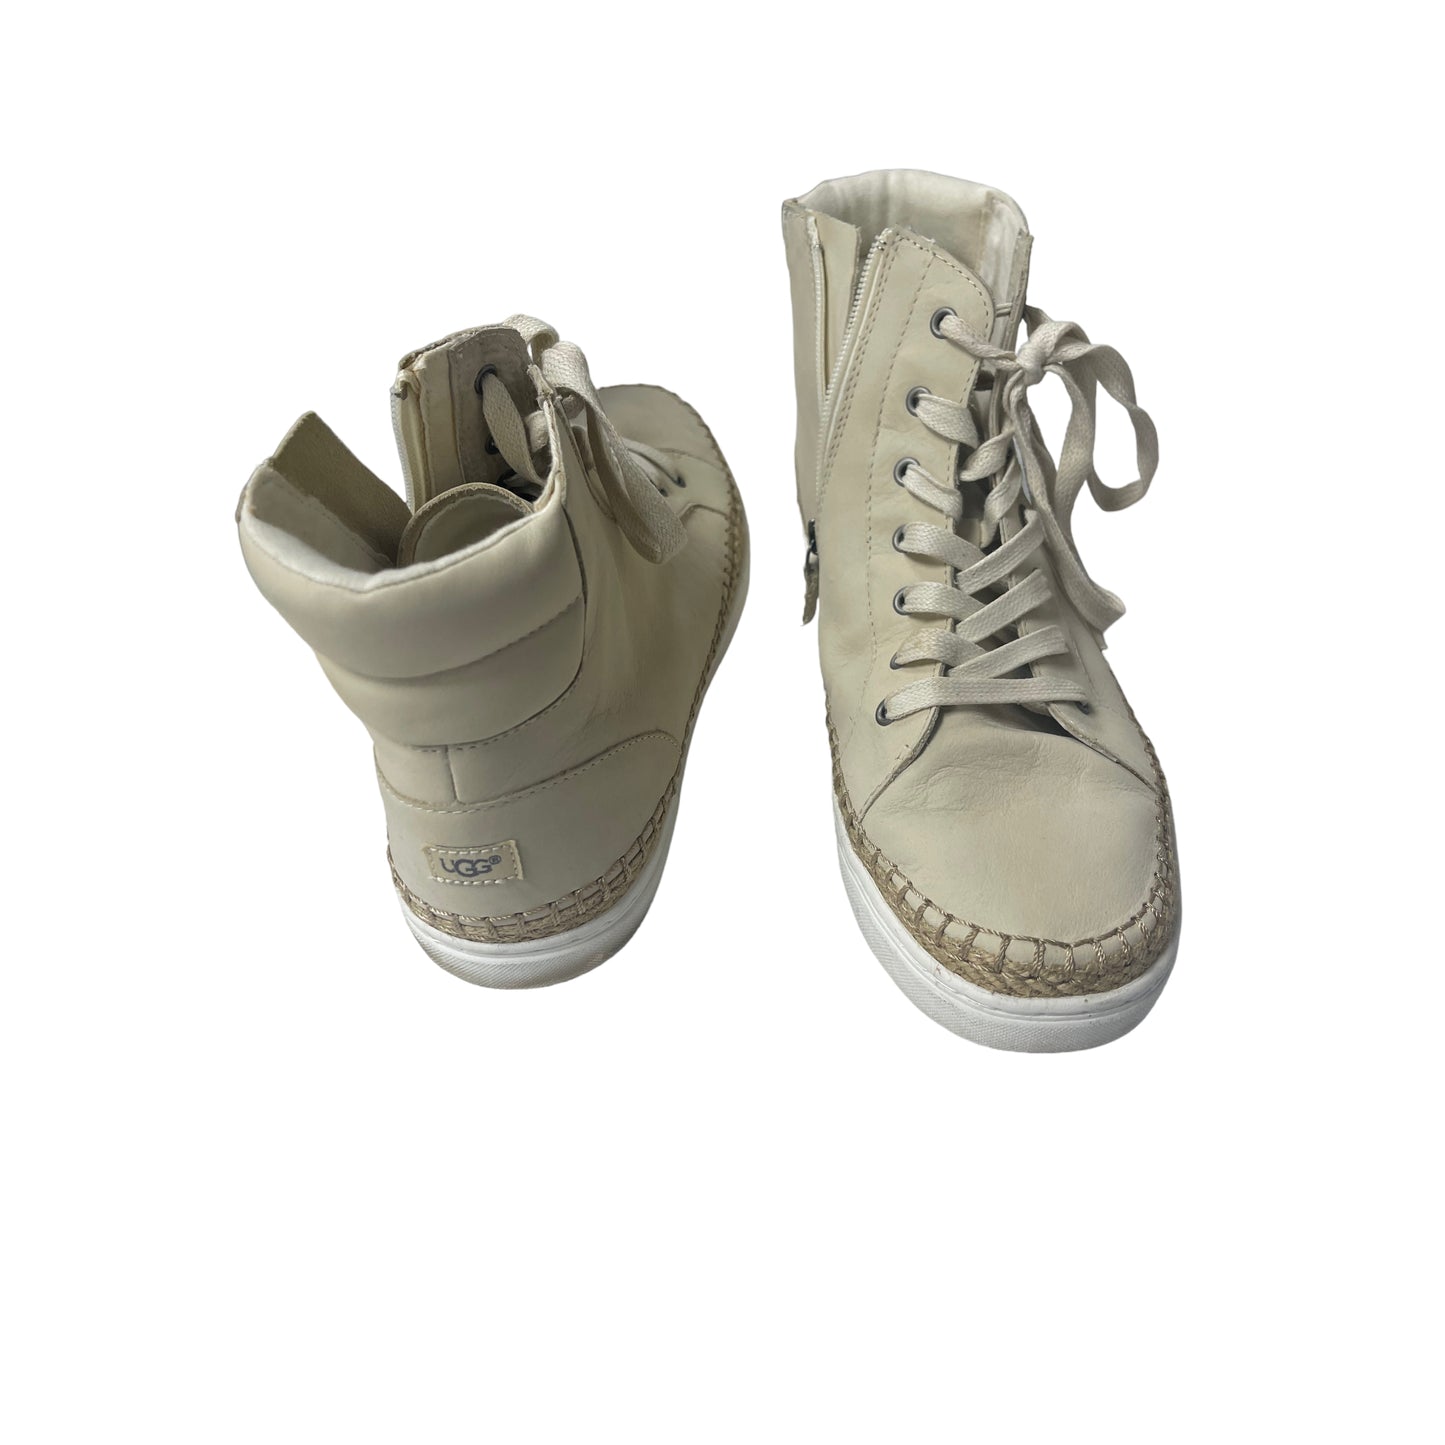 Shoes Sneakers By Ugg  Size: 12